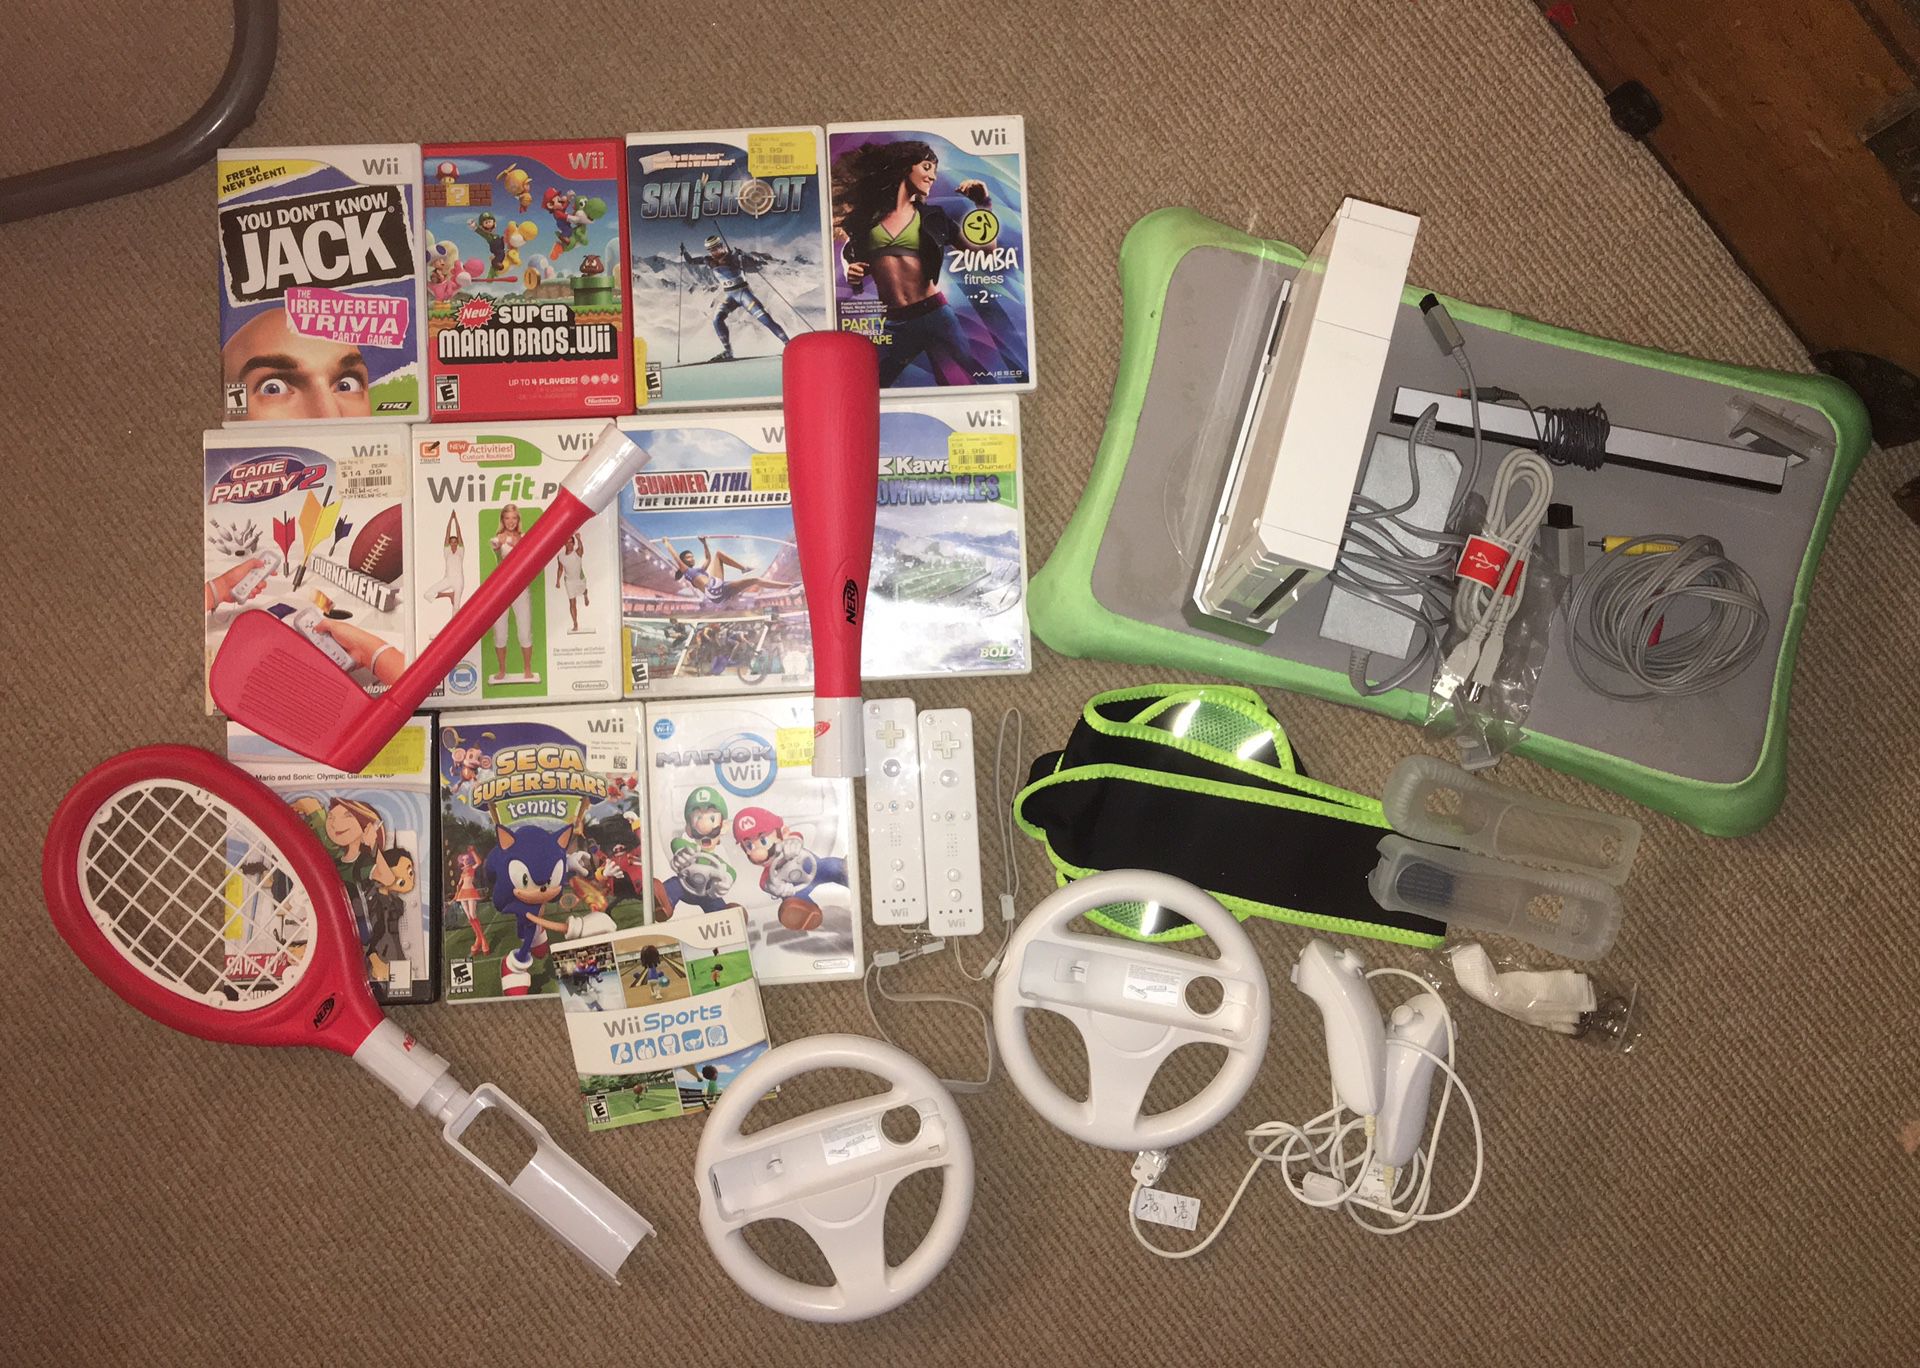 Nintendo Wii, balance board, accessories and games